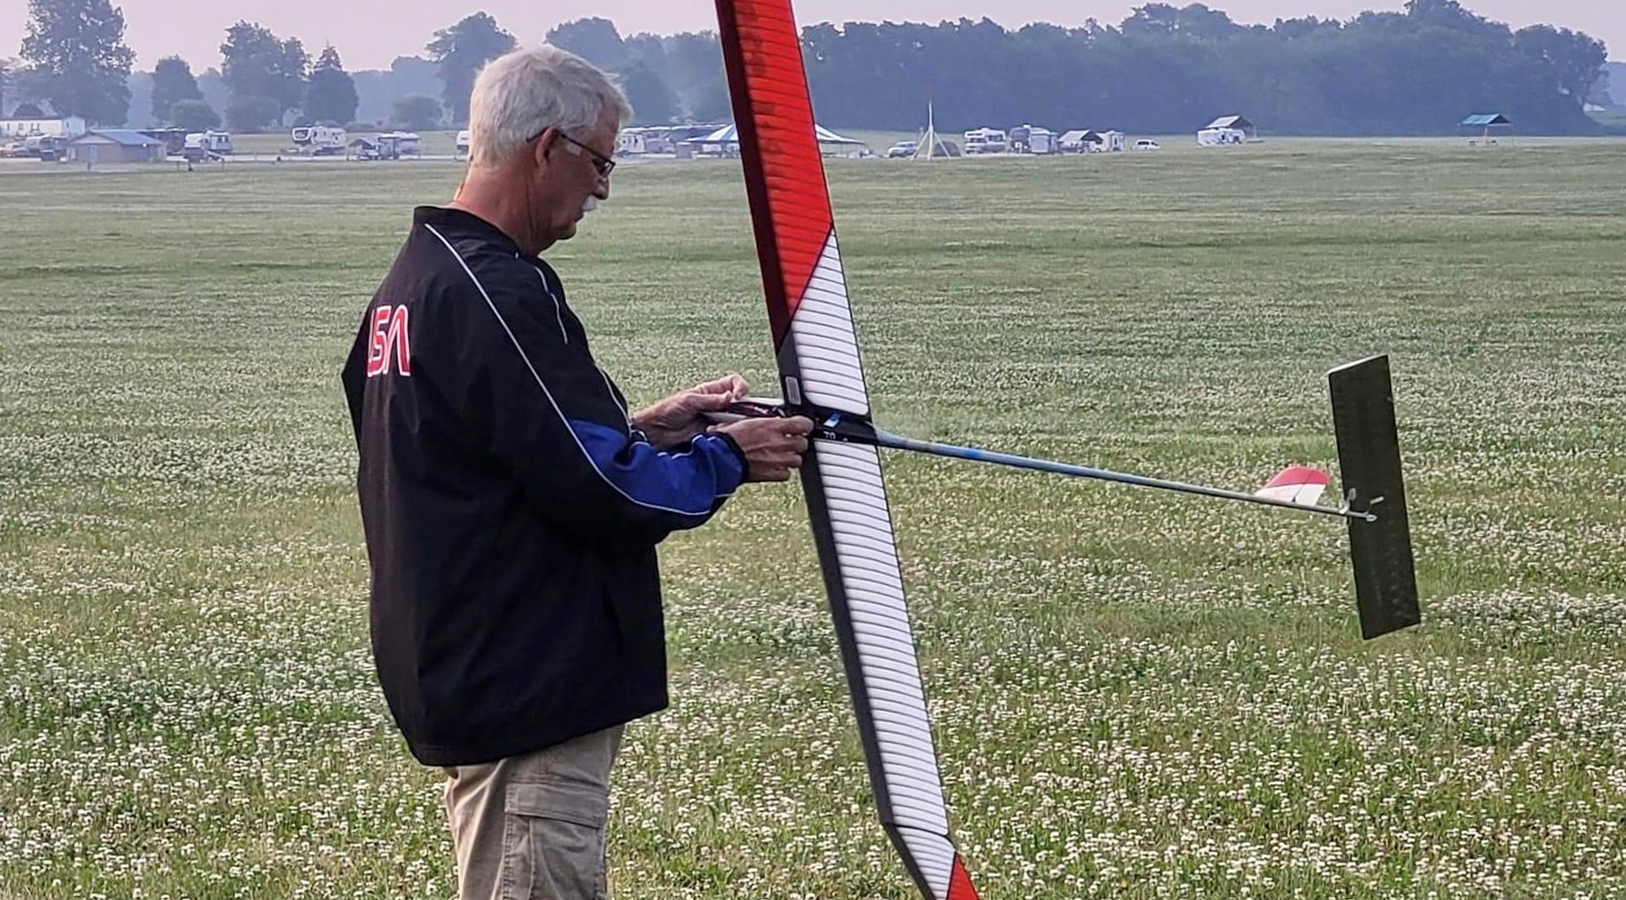 Third in F1A Glider went to Jim Parker of Texas.